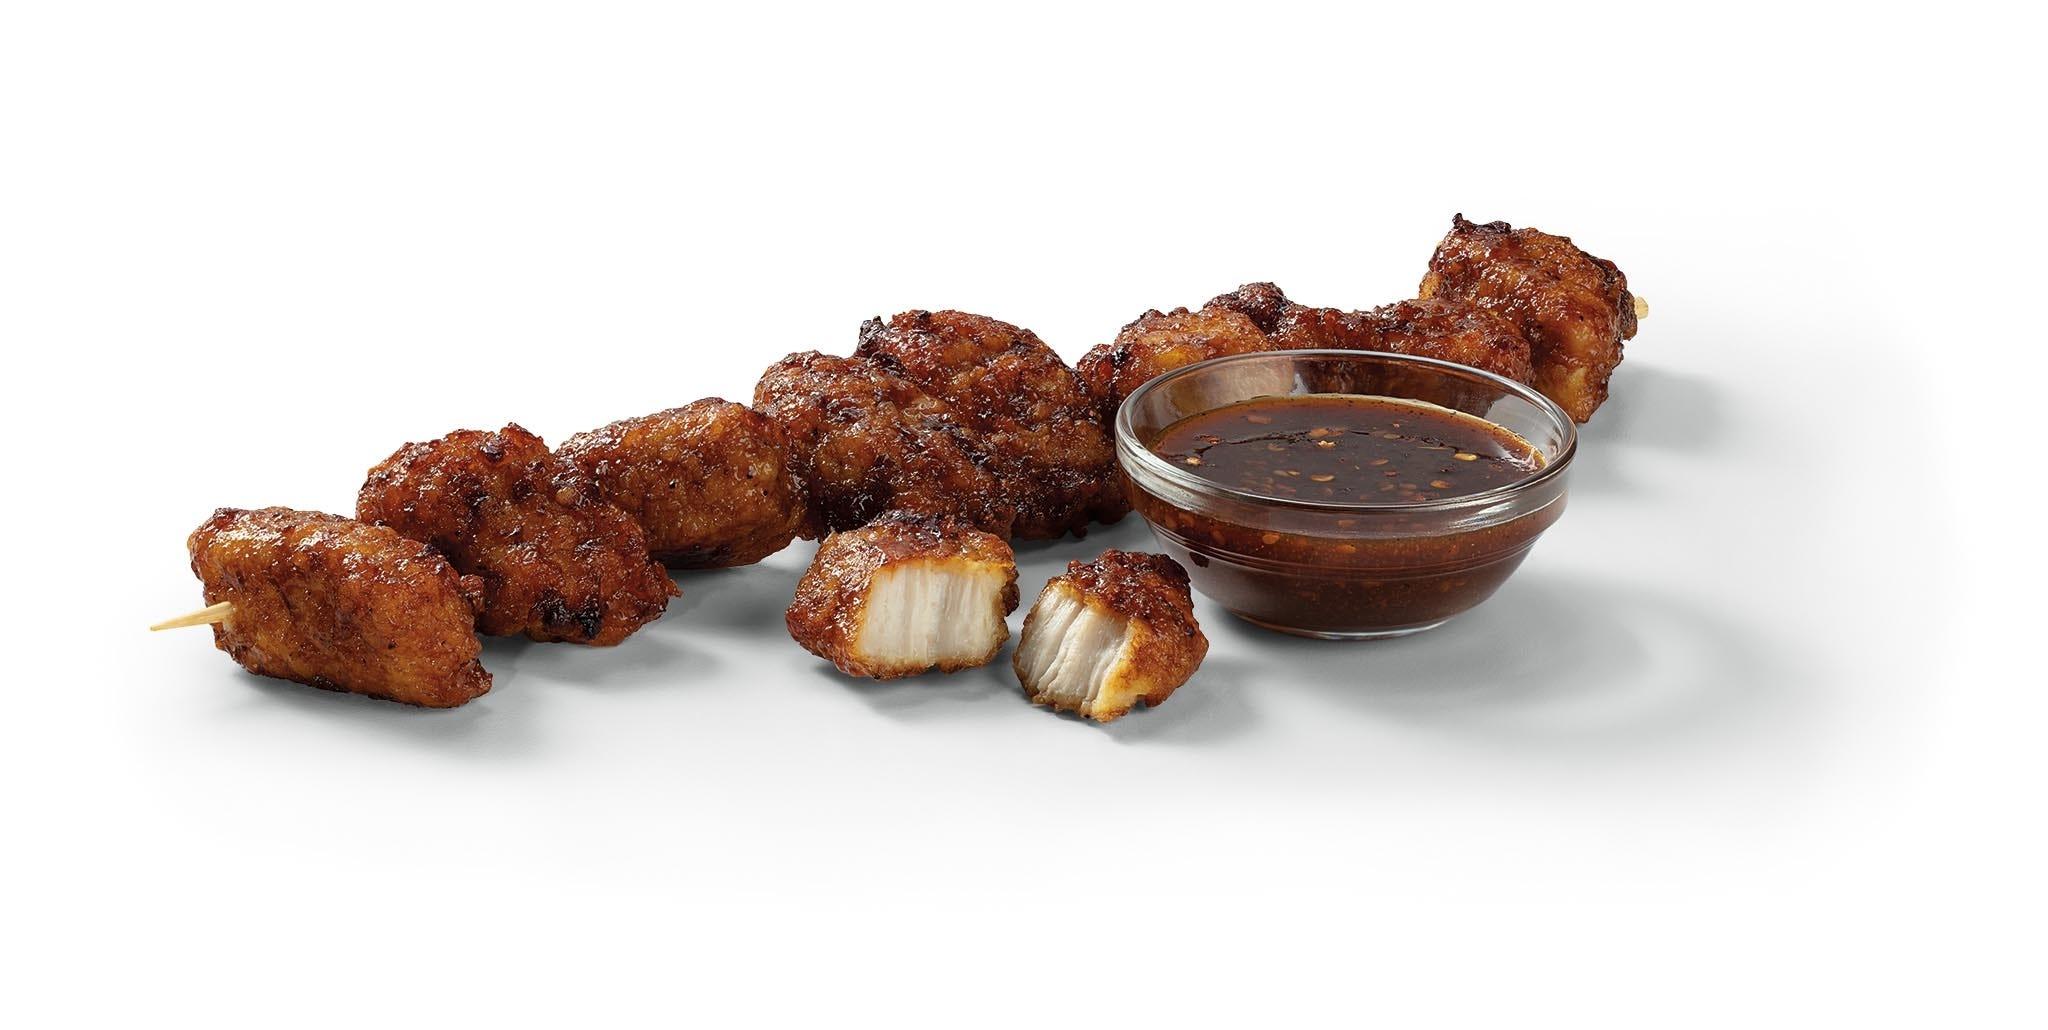 New Korean BBQ boneless wings - lightly breaded all-white-meat chicken coated a sweet soy, garlic and pepper glaze sauce - have arrived at 7-Eleven, Speedway and Stripes locations. Members of the 7Rewards and Speedy Rewards loyalty programs can get an 8-piece order for $3.